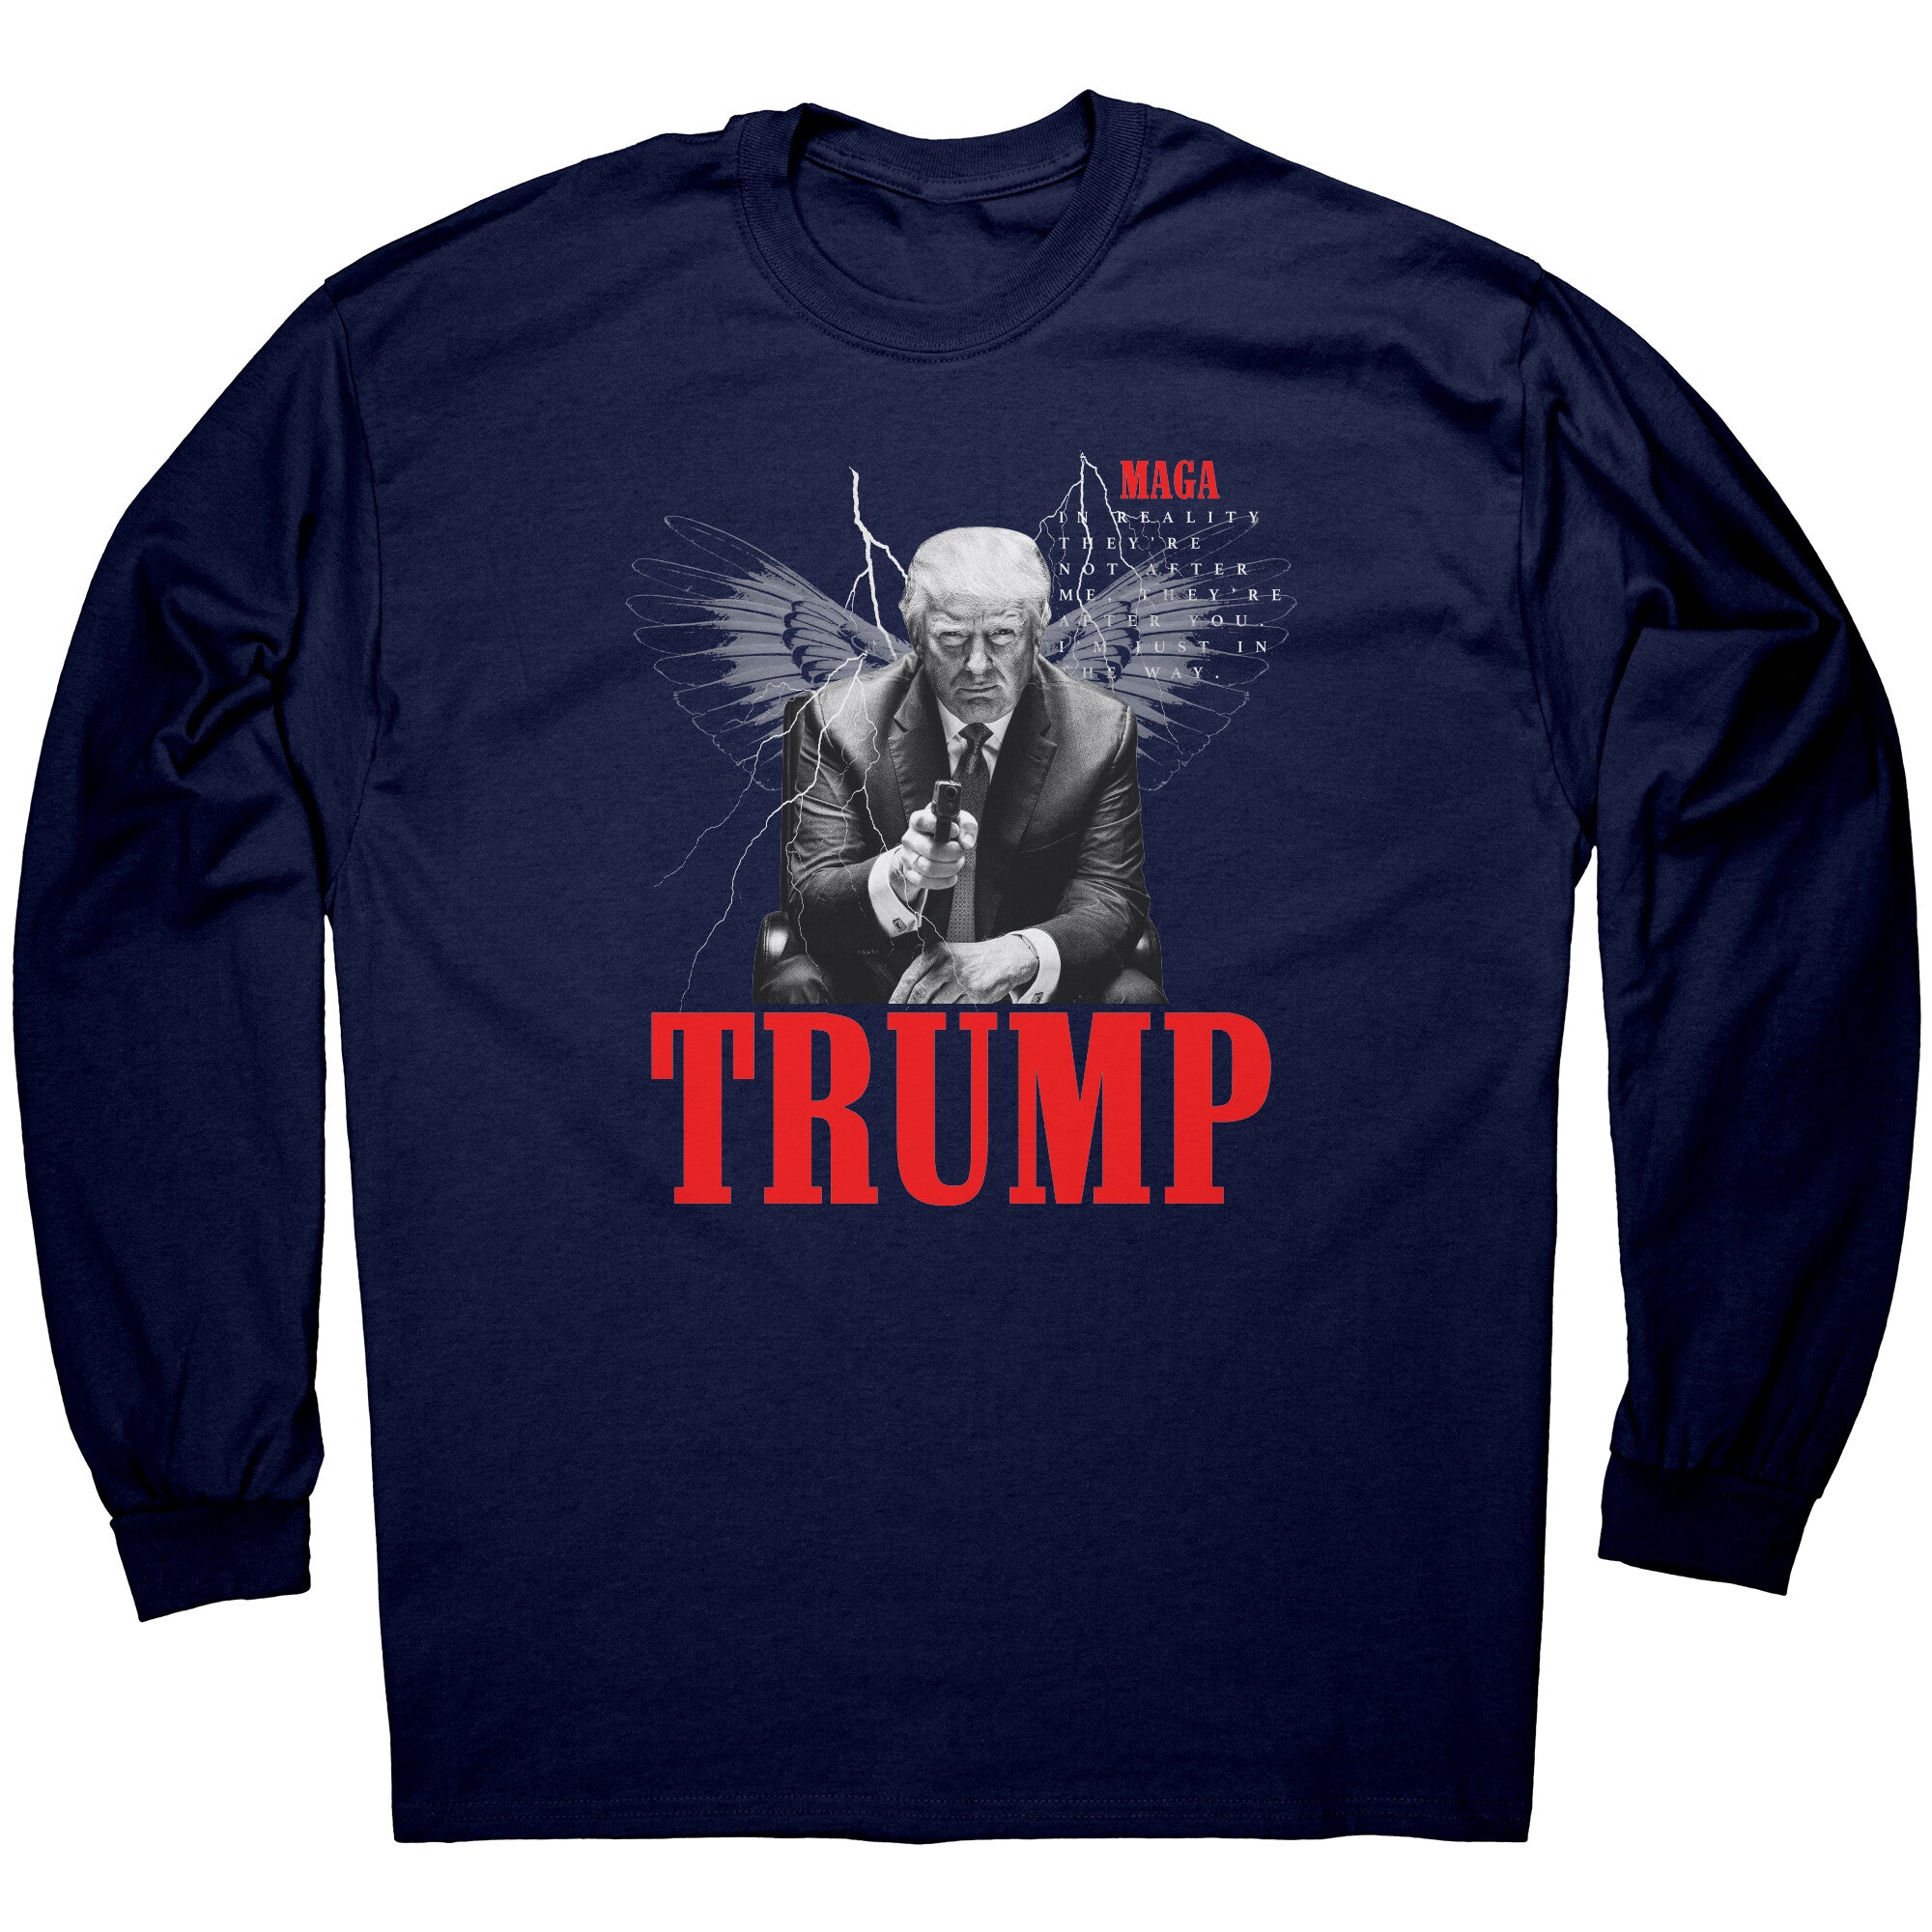 Trump In Reality They're Not After Me, They're After You. I'm Just In The Way. -Apparel | Drunk America 